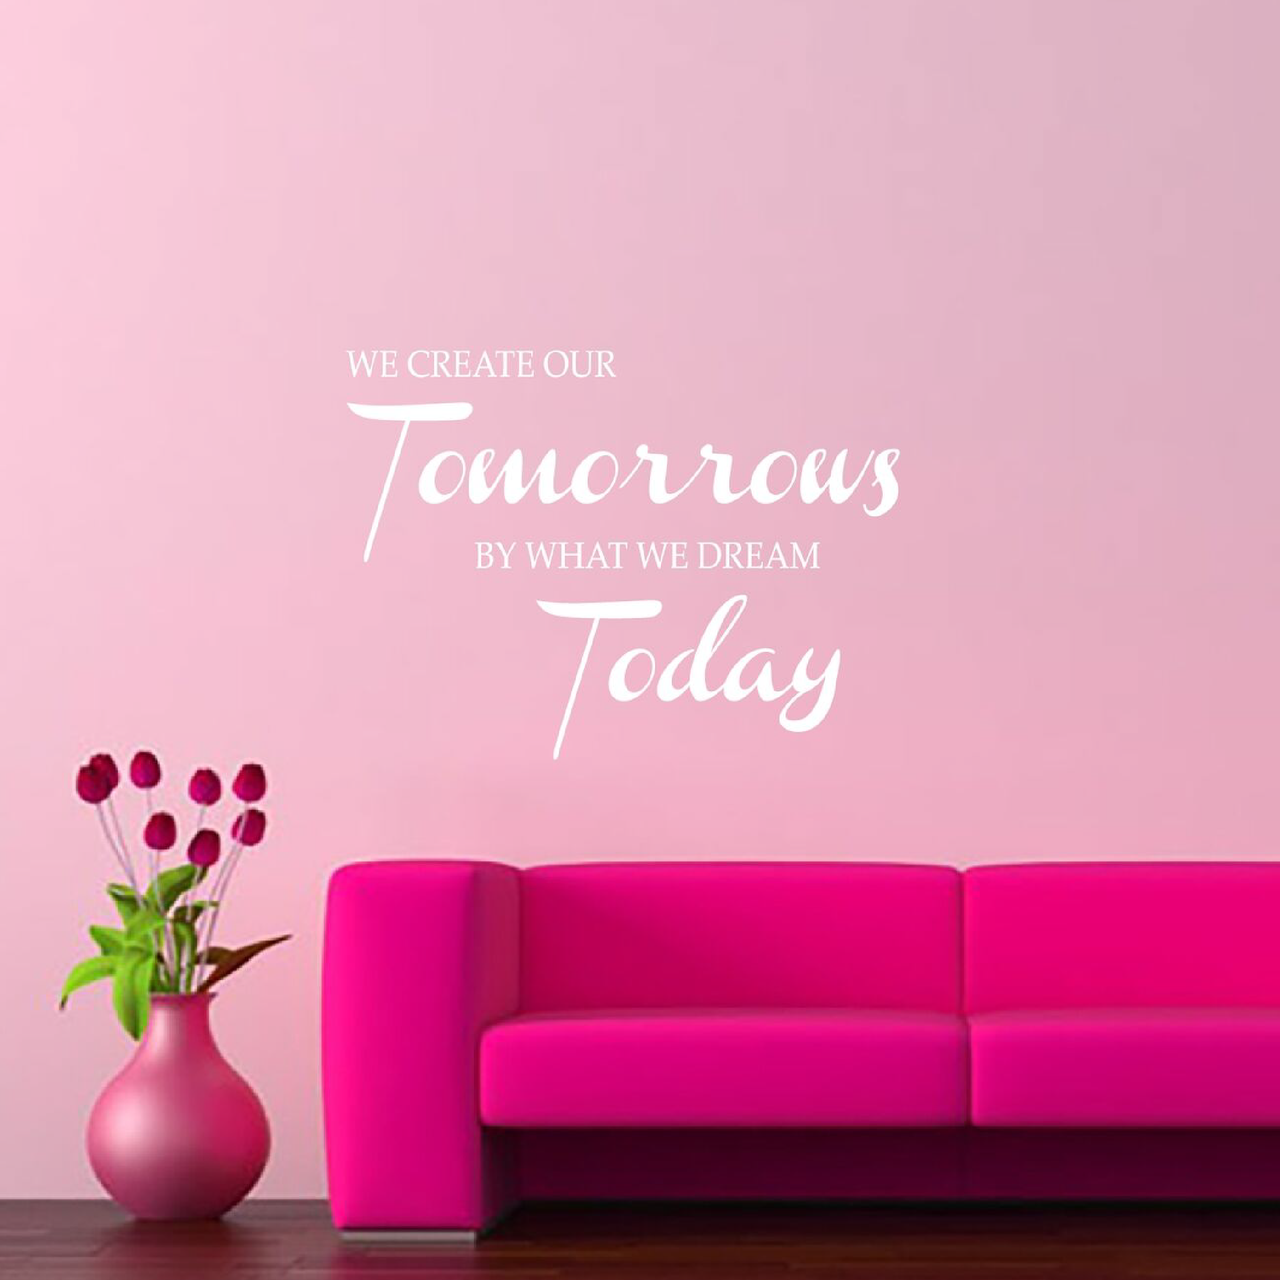 Create Our Tomorrow Wall Decal